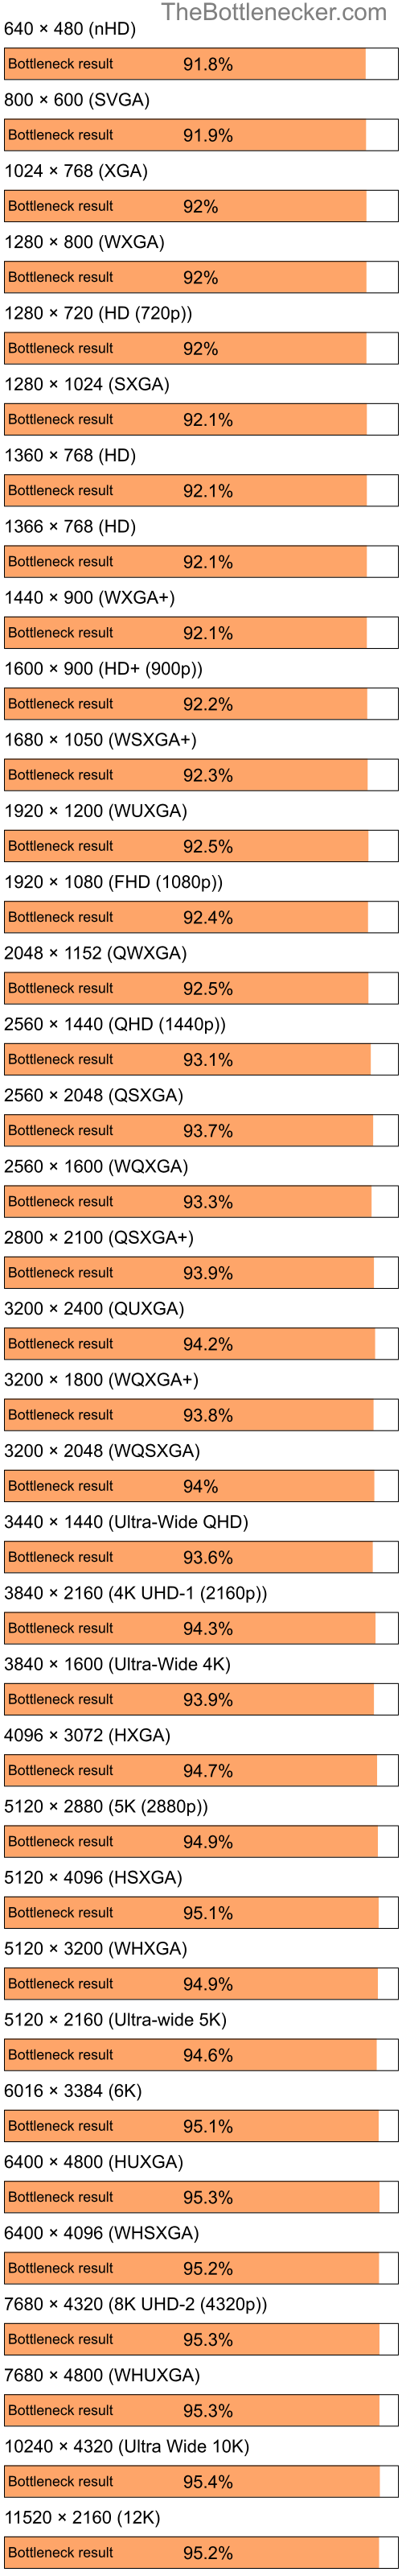 Bottleneck results by resolution for Intel Atom N270 and AMD Radeon 7000 in7 Days to Die